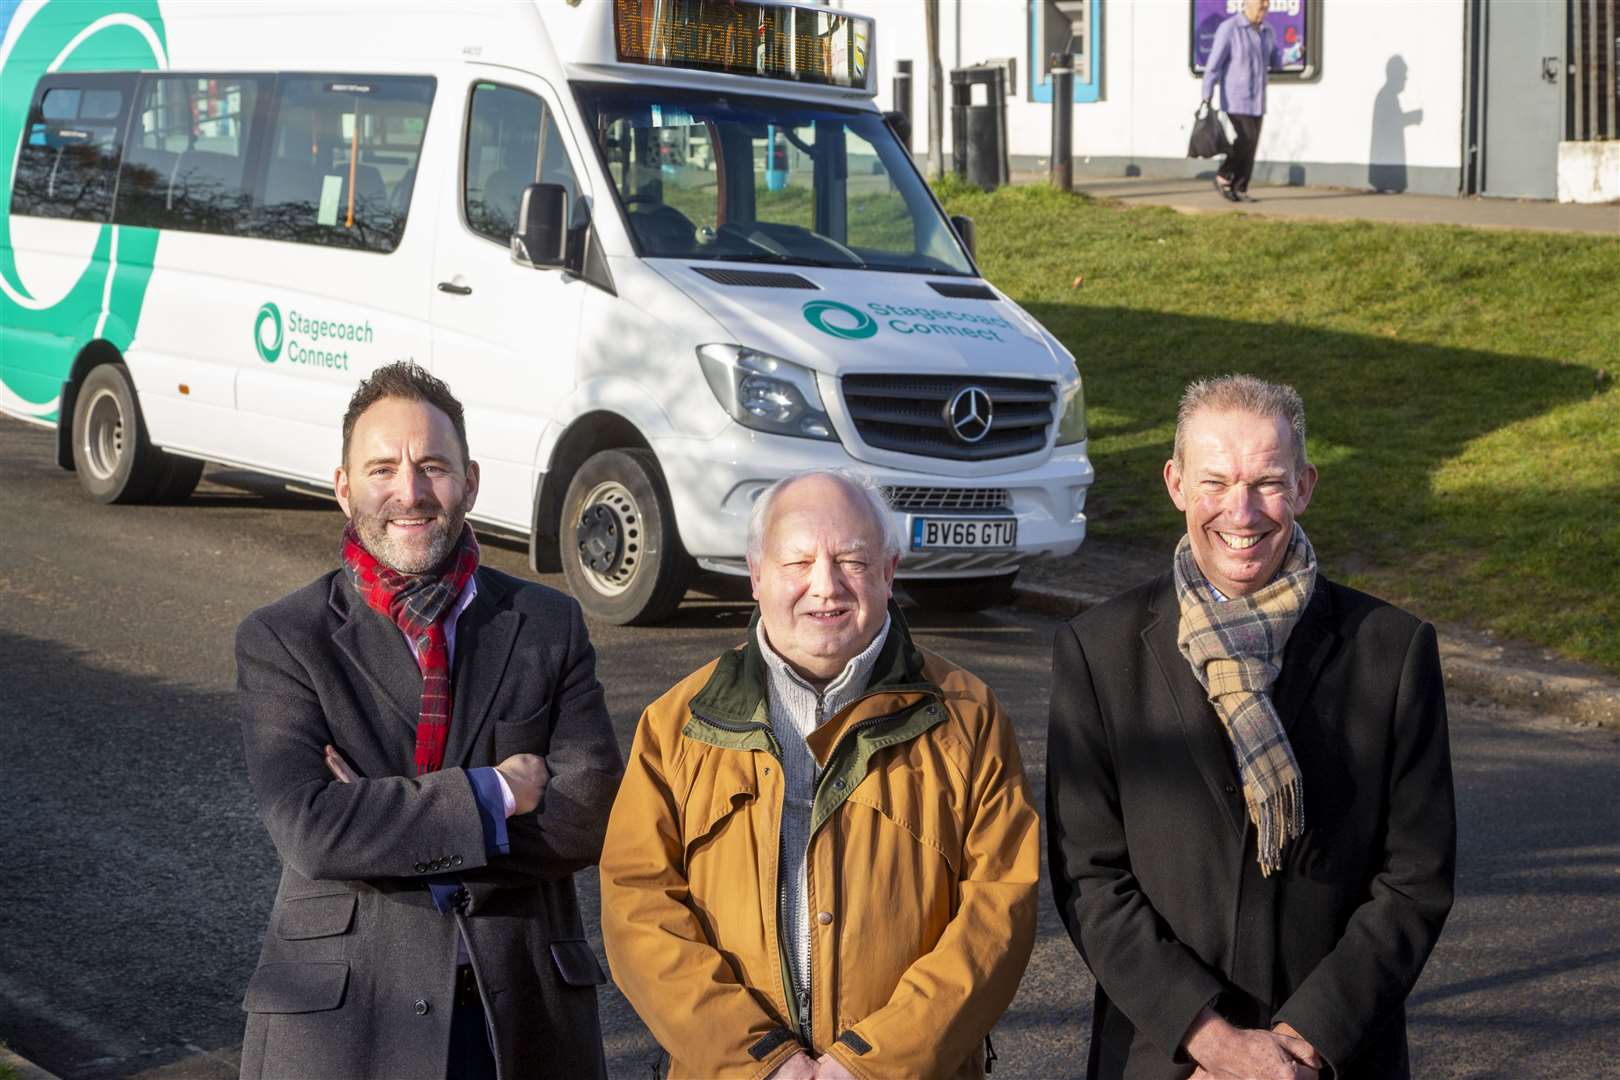 Stagecoach South East managing director Joel Mitchell with DDC’s cabinet member for transport Cllr Martin Bates and DDC leader Cllr Trevor Bartlett. Picture: Dover District Council